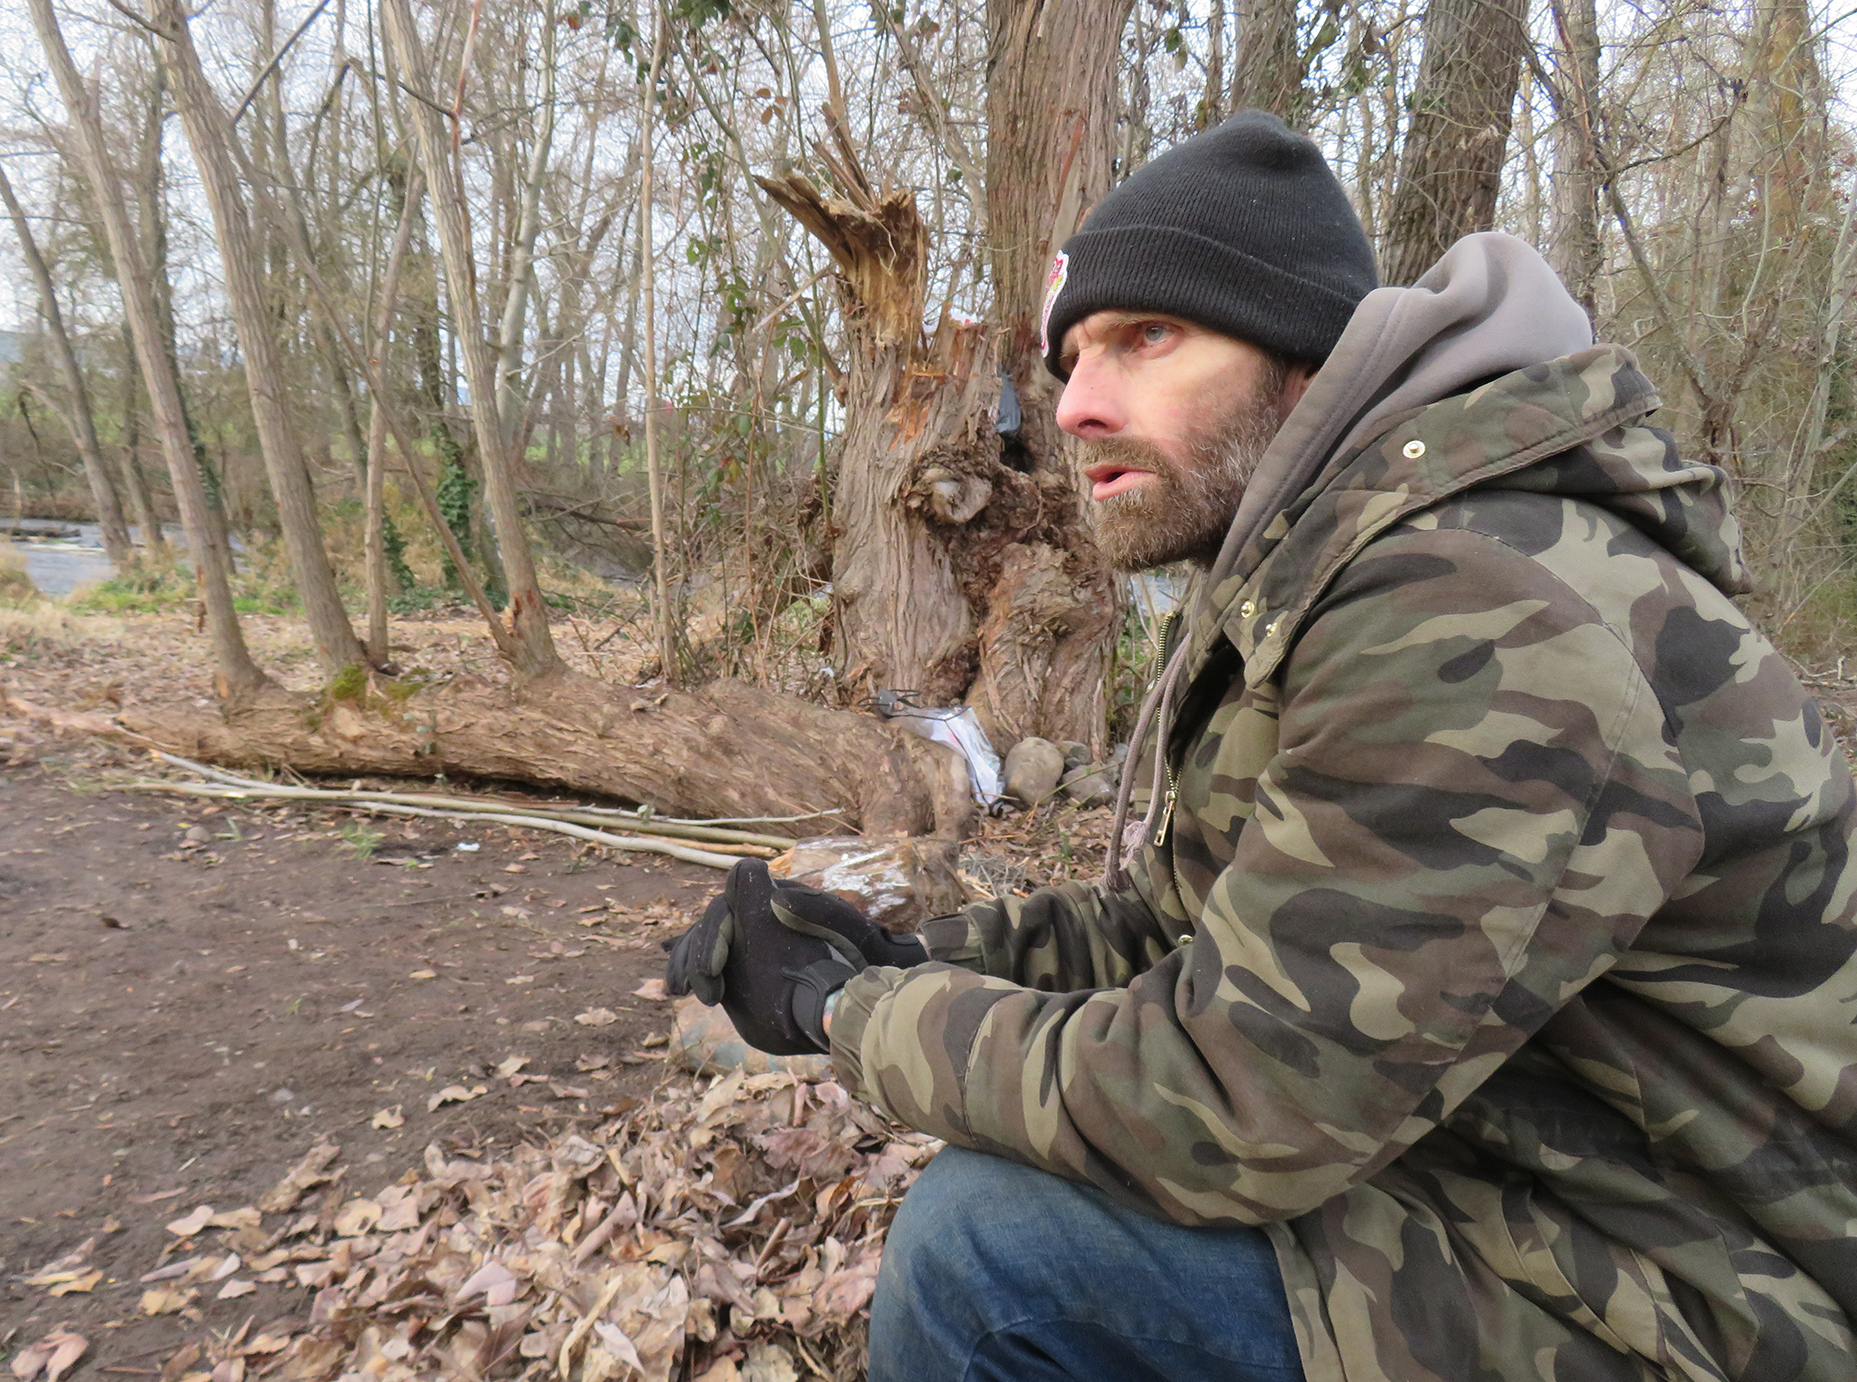 A photo of Travis “T-Bone” Greiner speaking and looking to the distance in a beanie and camo jacket.